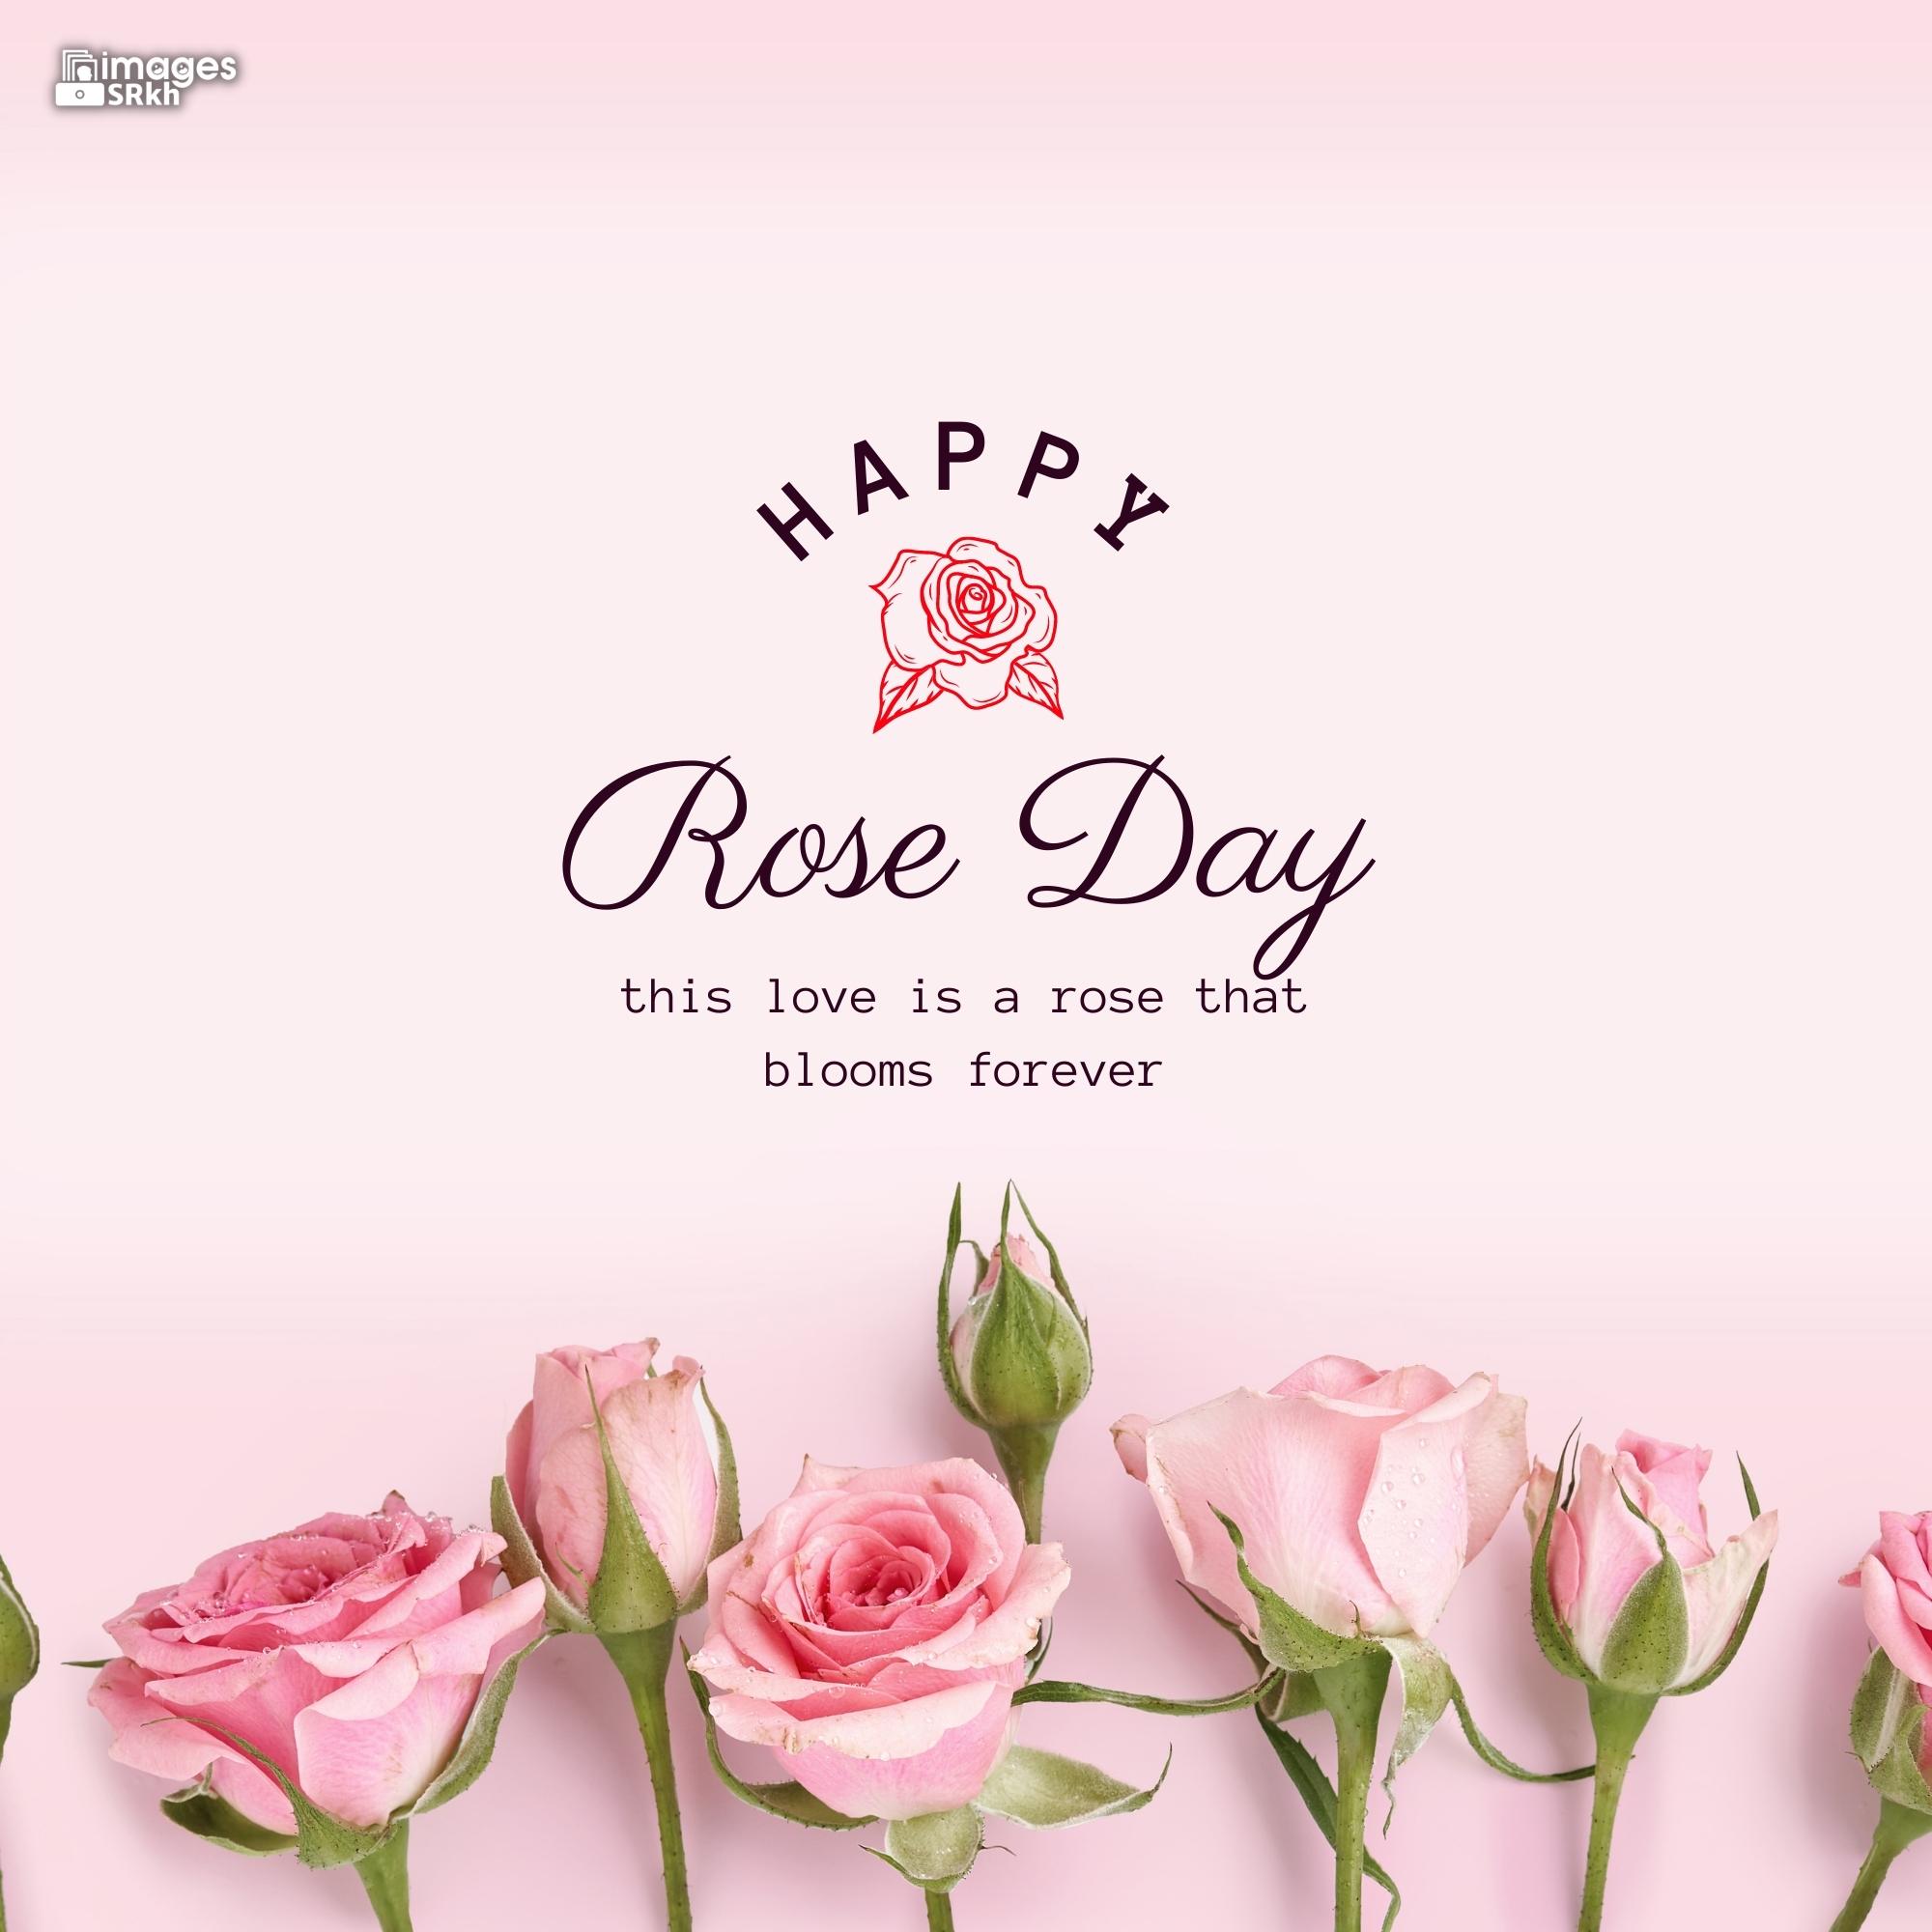 Happy Rose Day Image Hd Download (95)